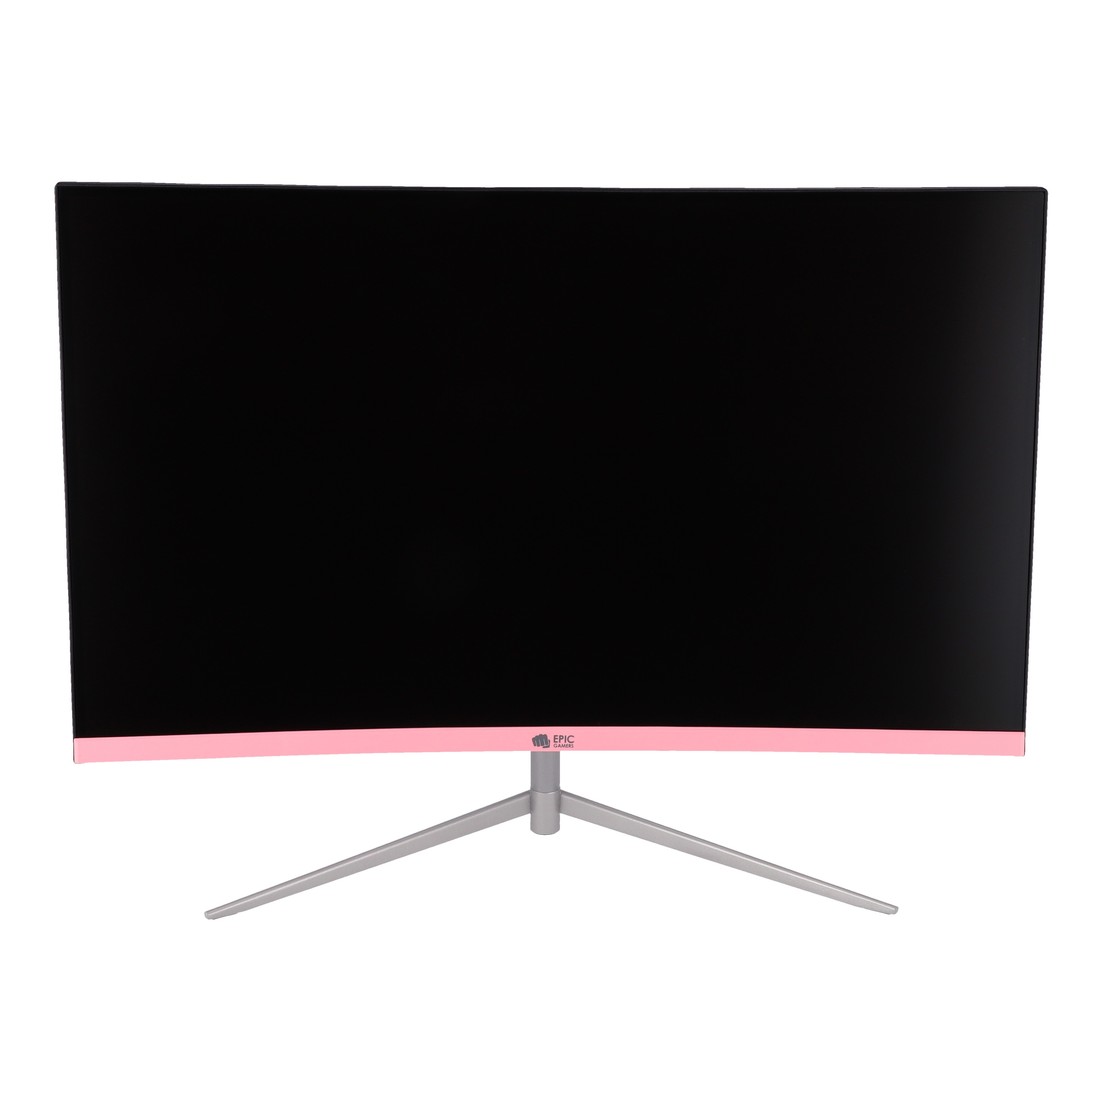 Epic Gamers 27-inch FHD/240Hz Gaming Monitor - White/Pink